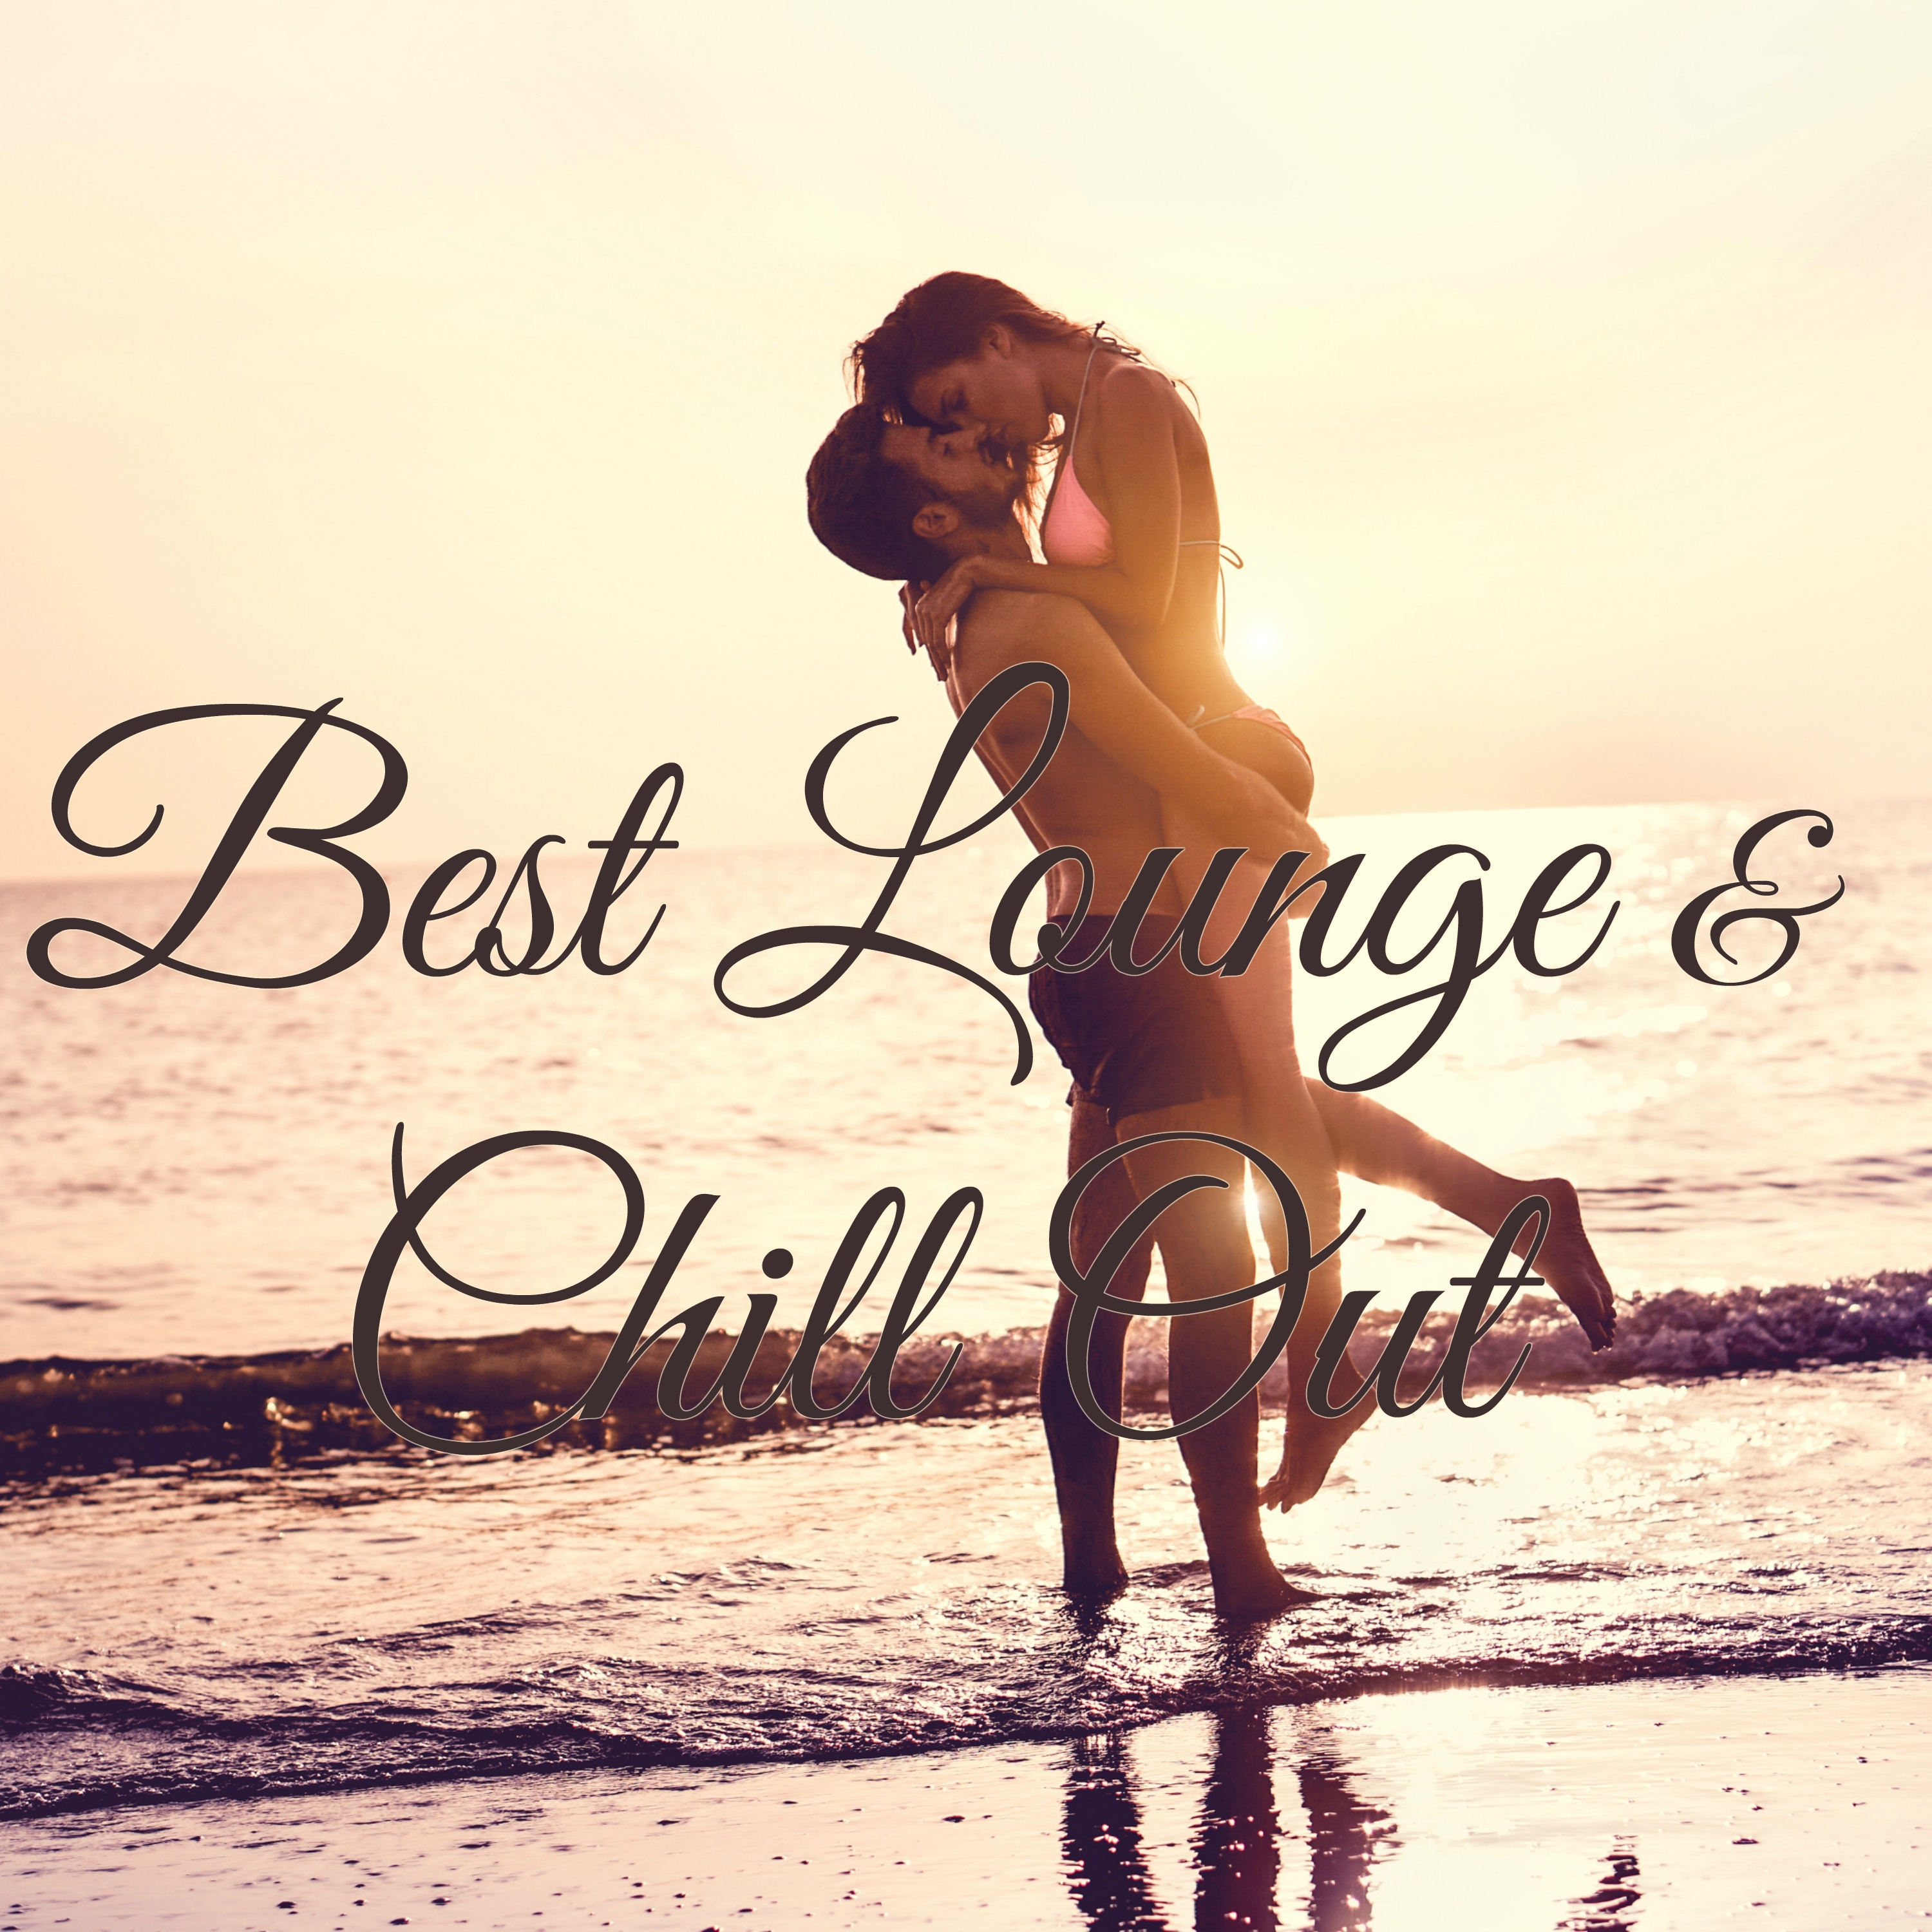 Best Lounge  Chill Out  Sensual Chillout Instrumental Music for End of Summer Lovers Night